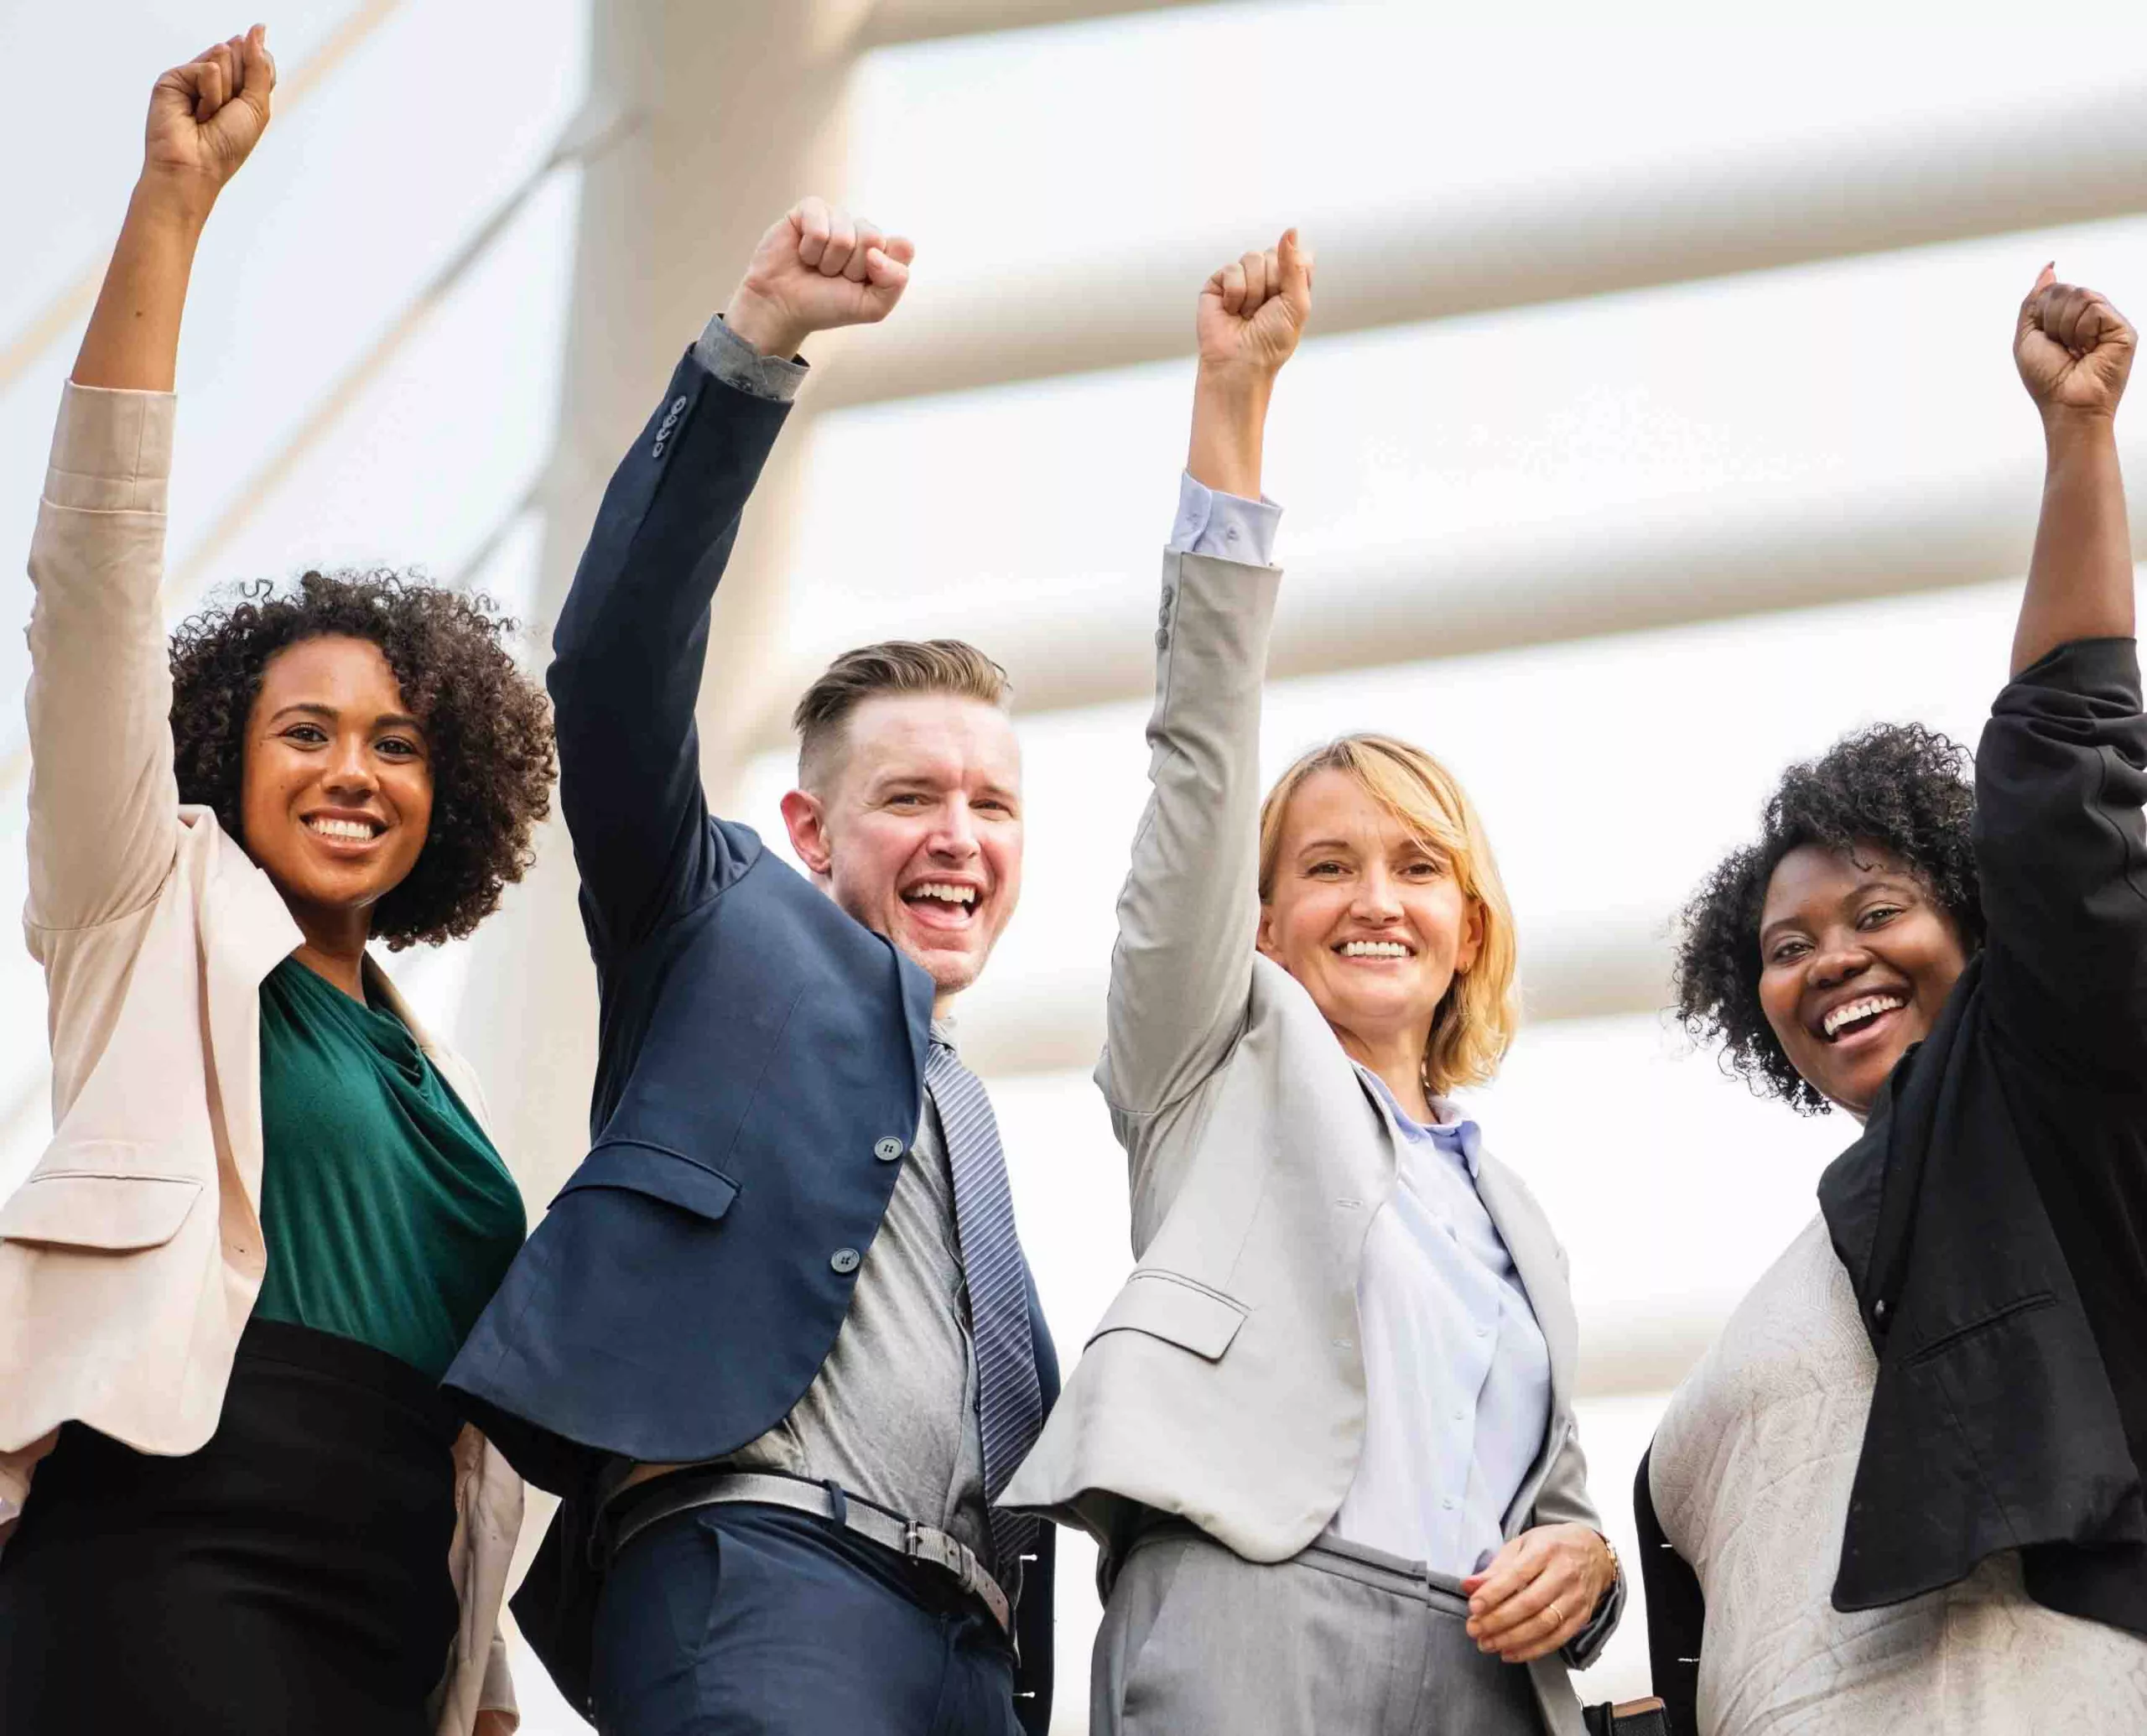 Diverse group of professionals celebrating success with raised arms